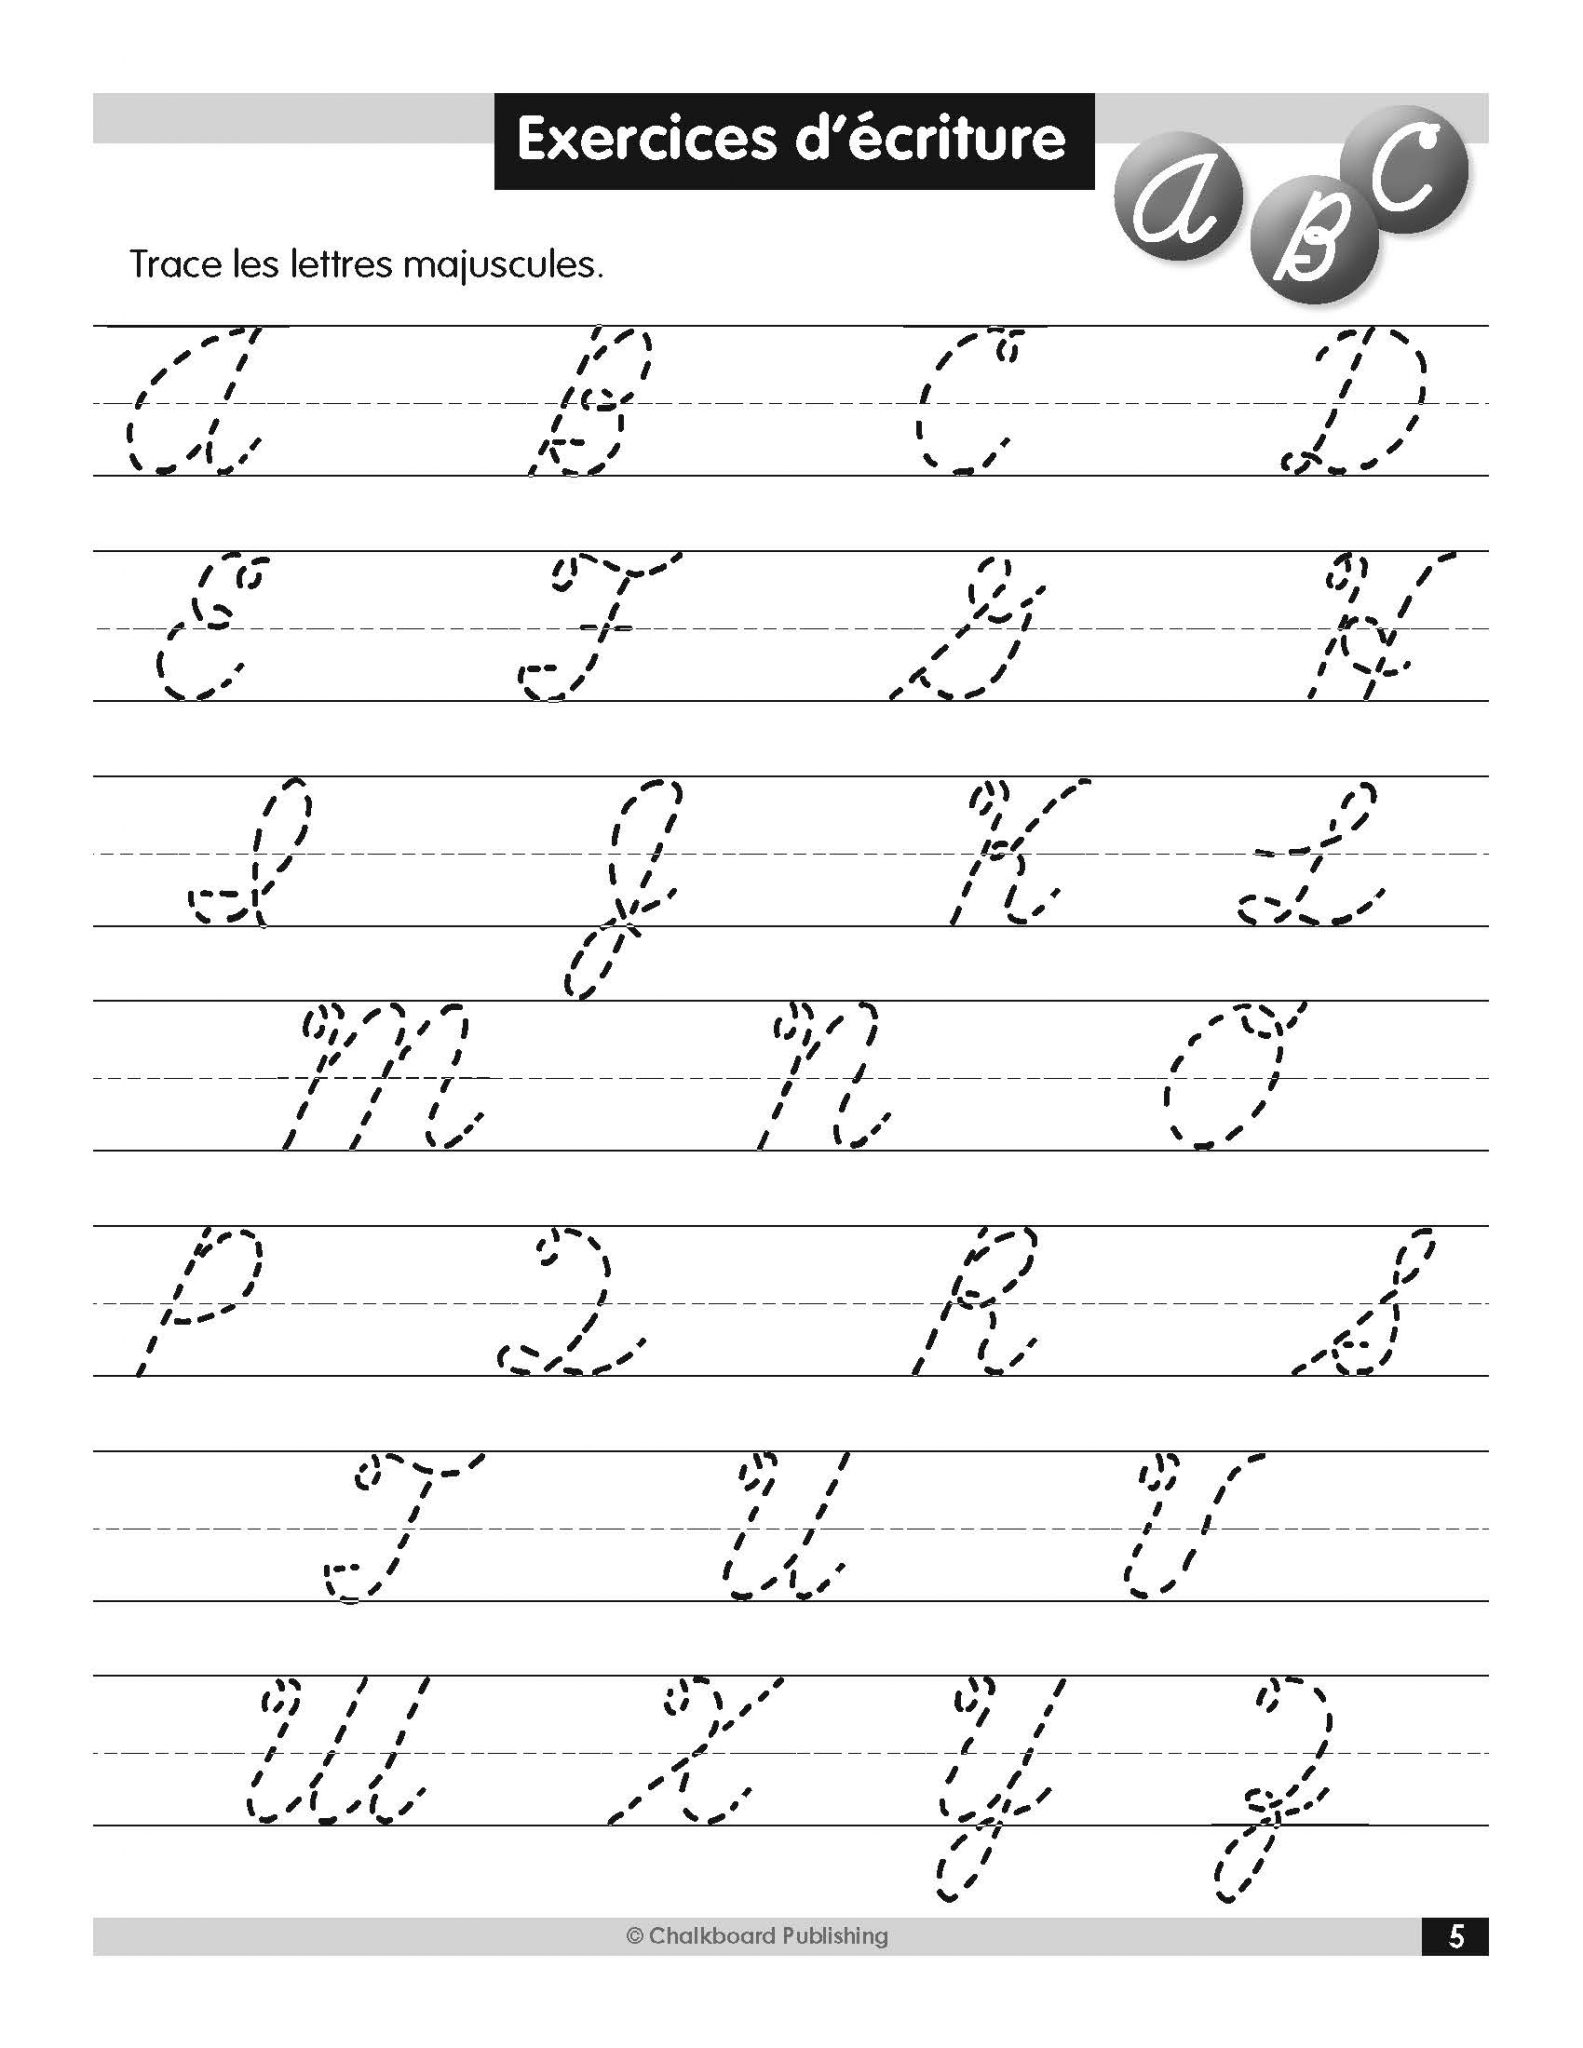 canadian french daily cursive writing practice grades 2 4